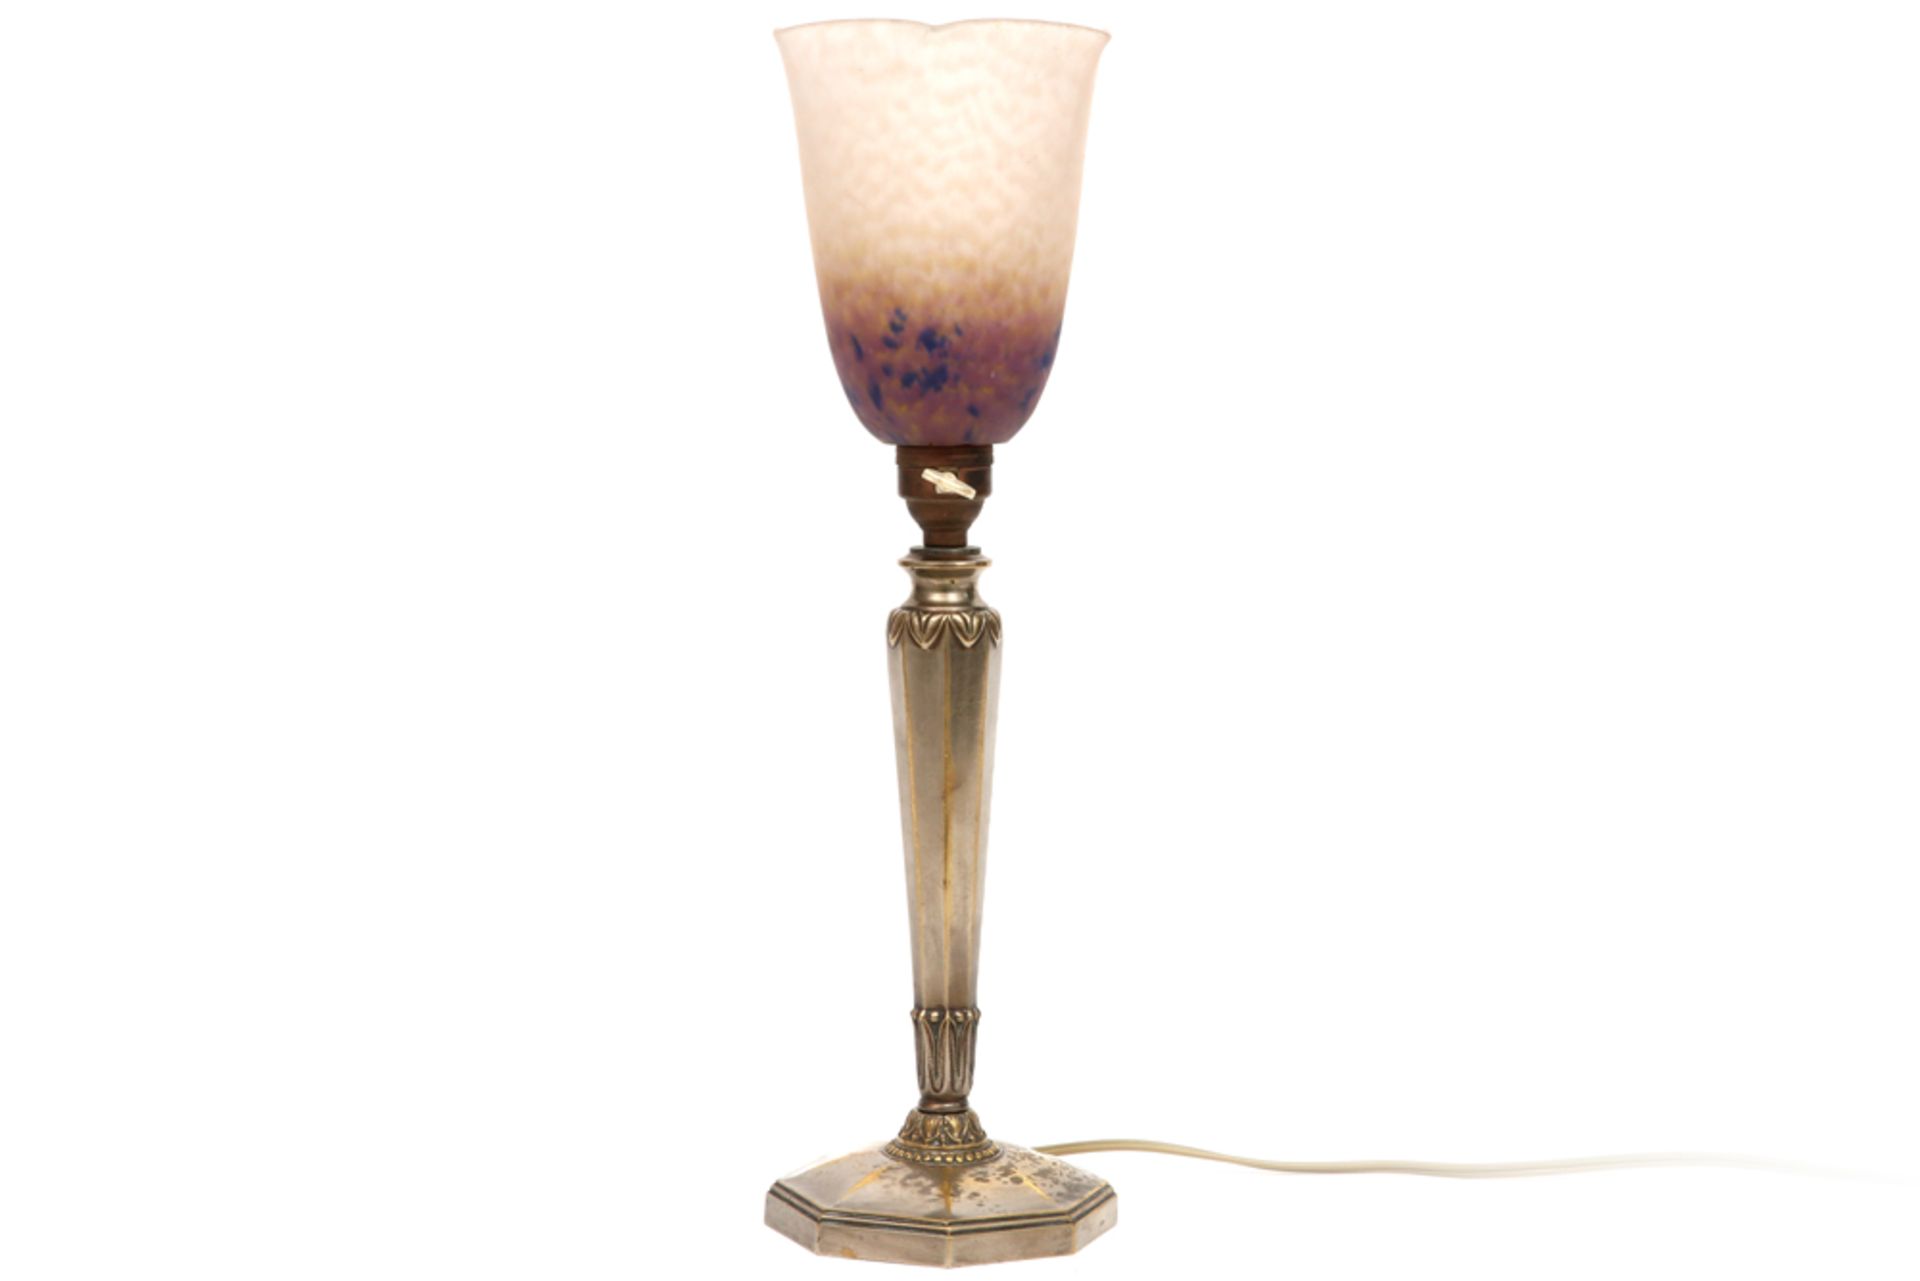 French Schneider signed Art Deco lamp with a silverplated base and a shade in pâte de verre || - Image 2 of 4